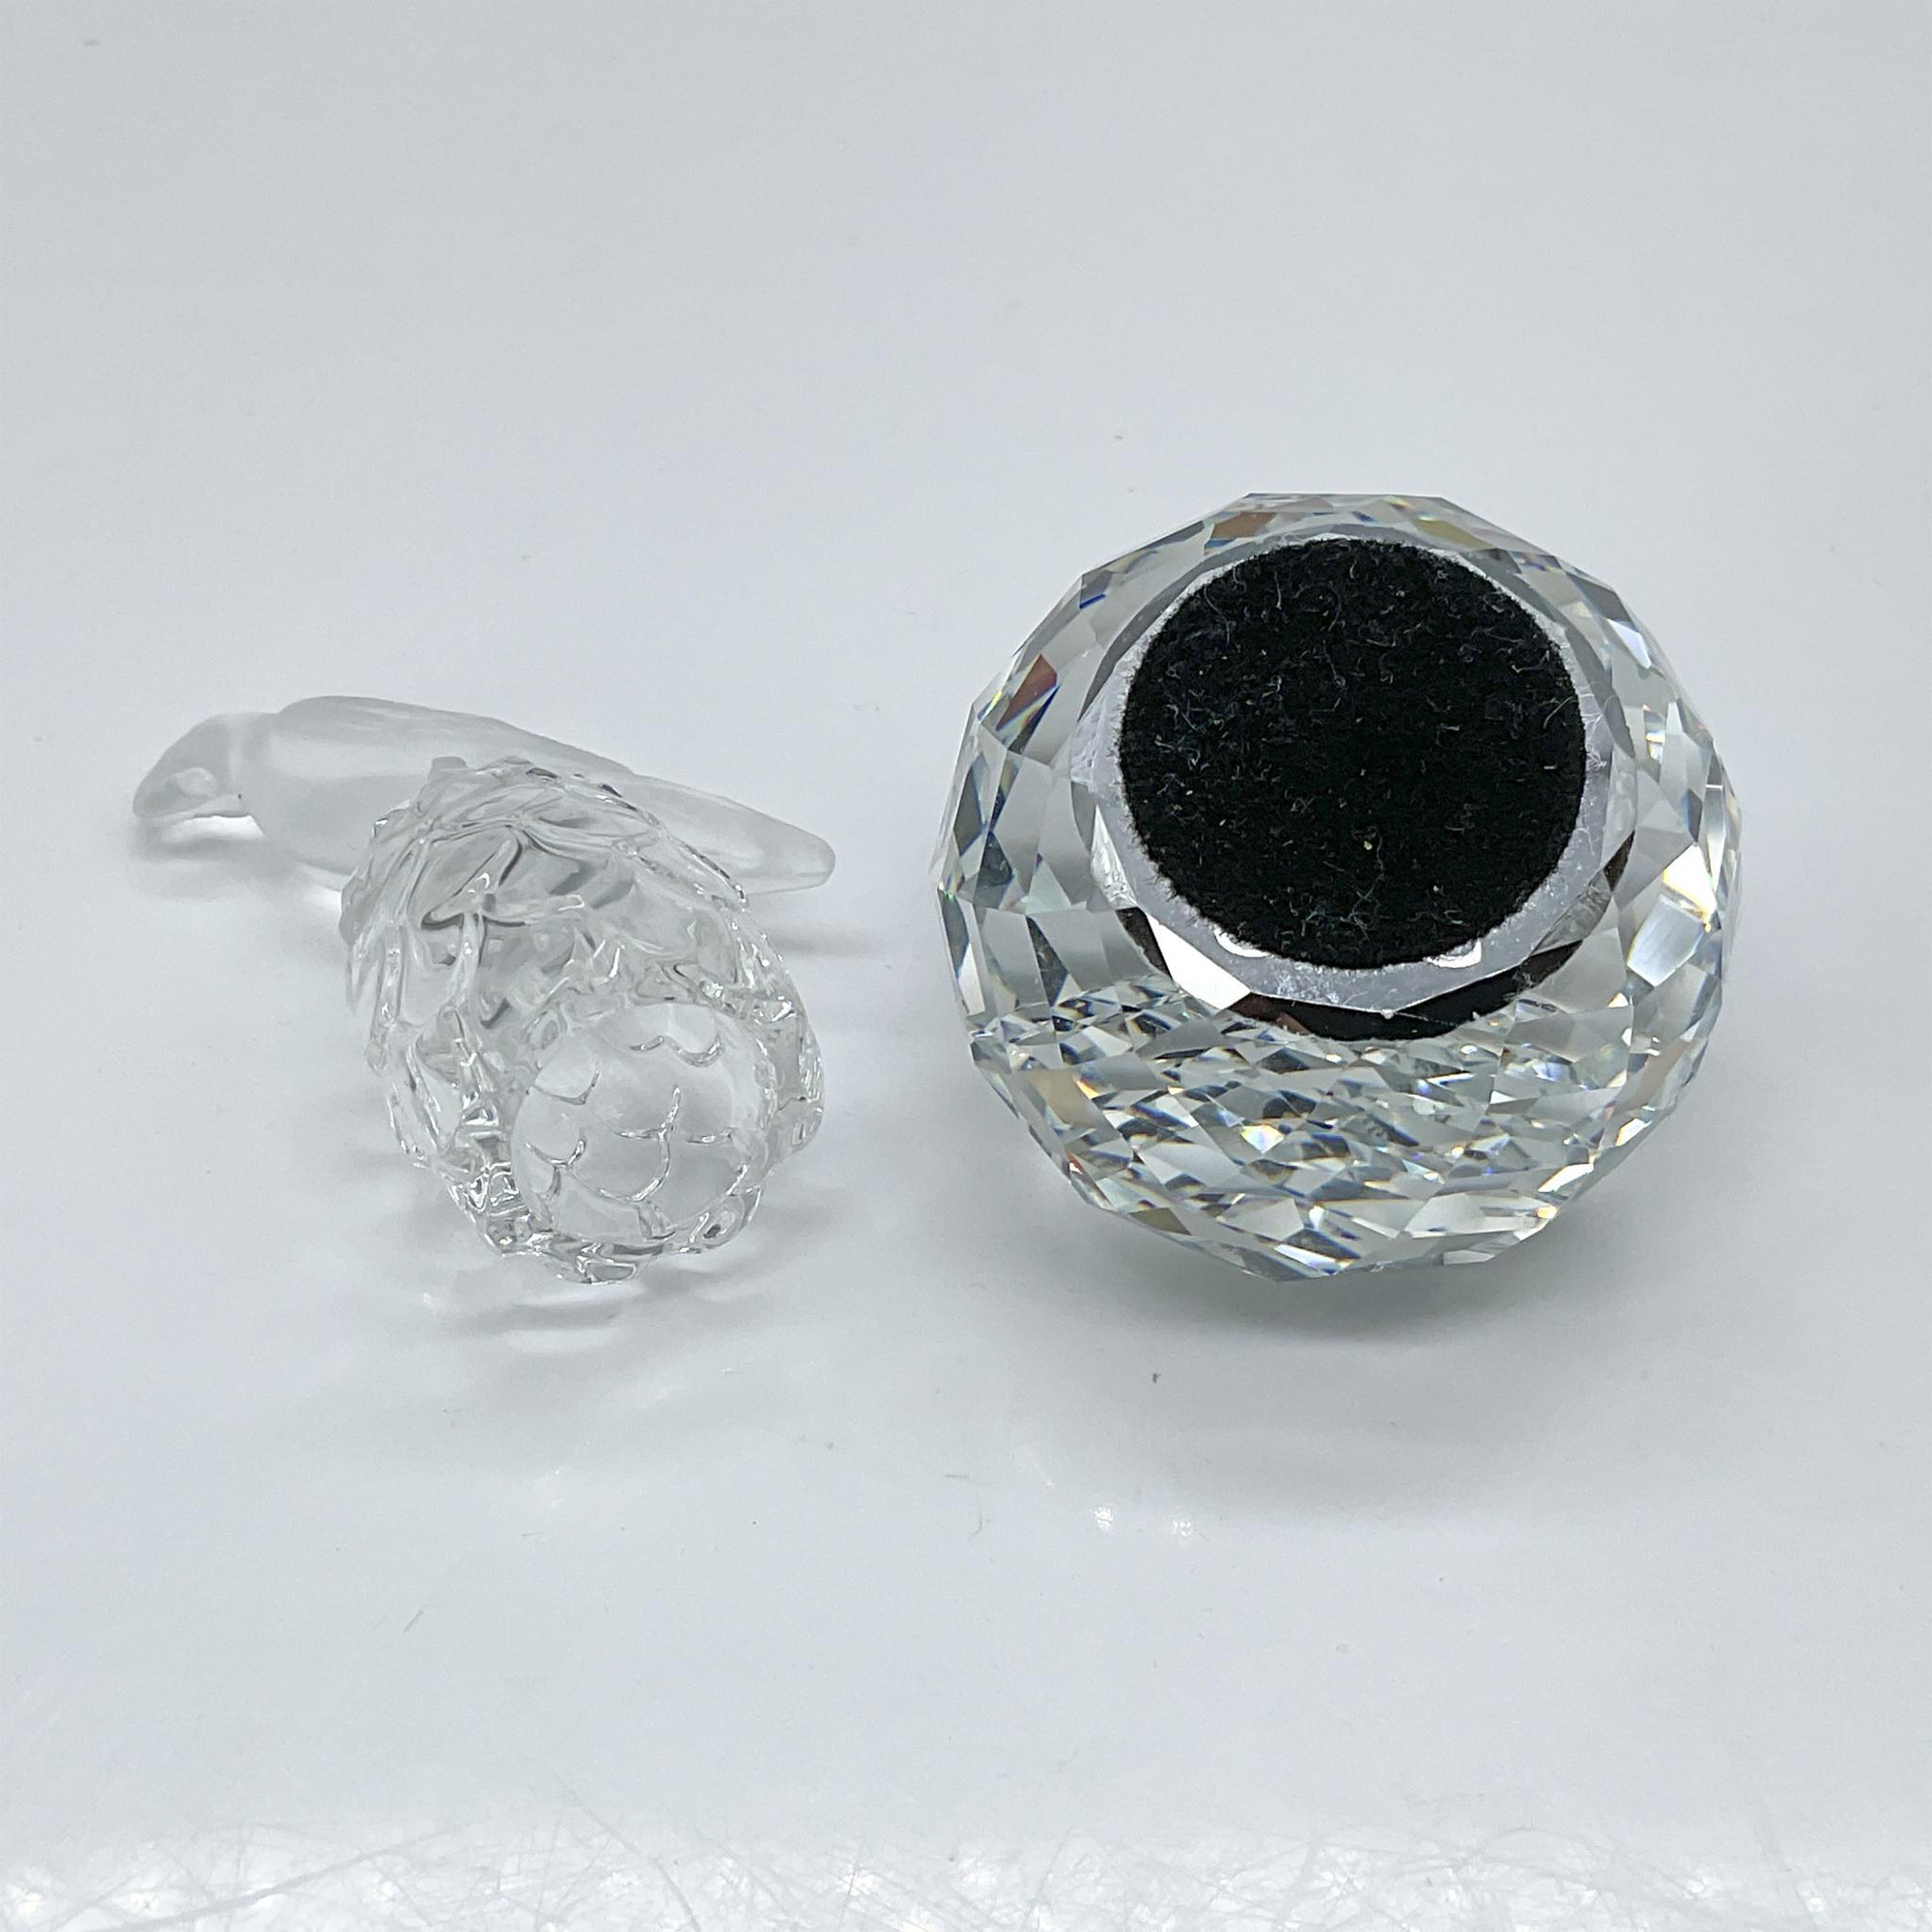 2pc Swarovski Crystal Figurines, Parrot Thimble, Paperweight - Image 3 of 4